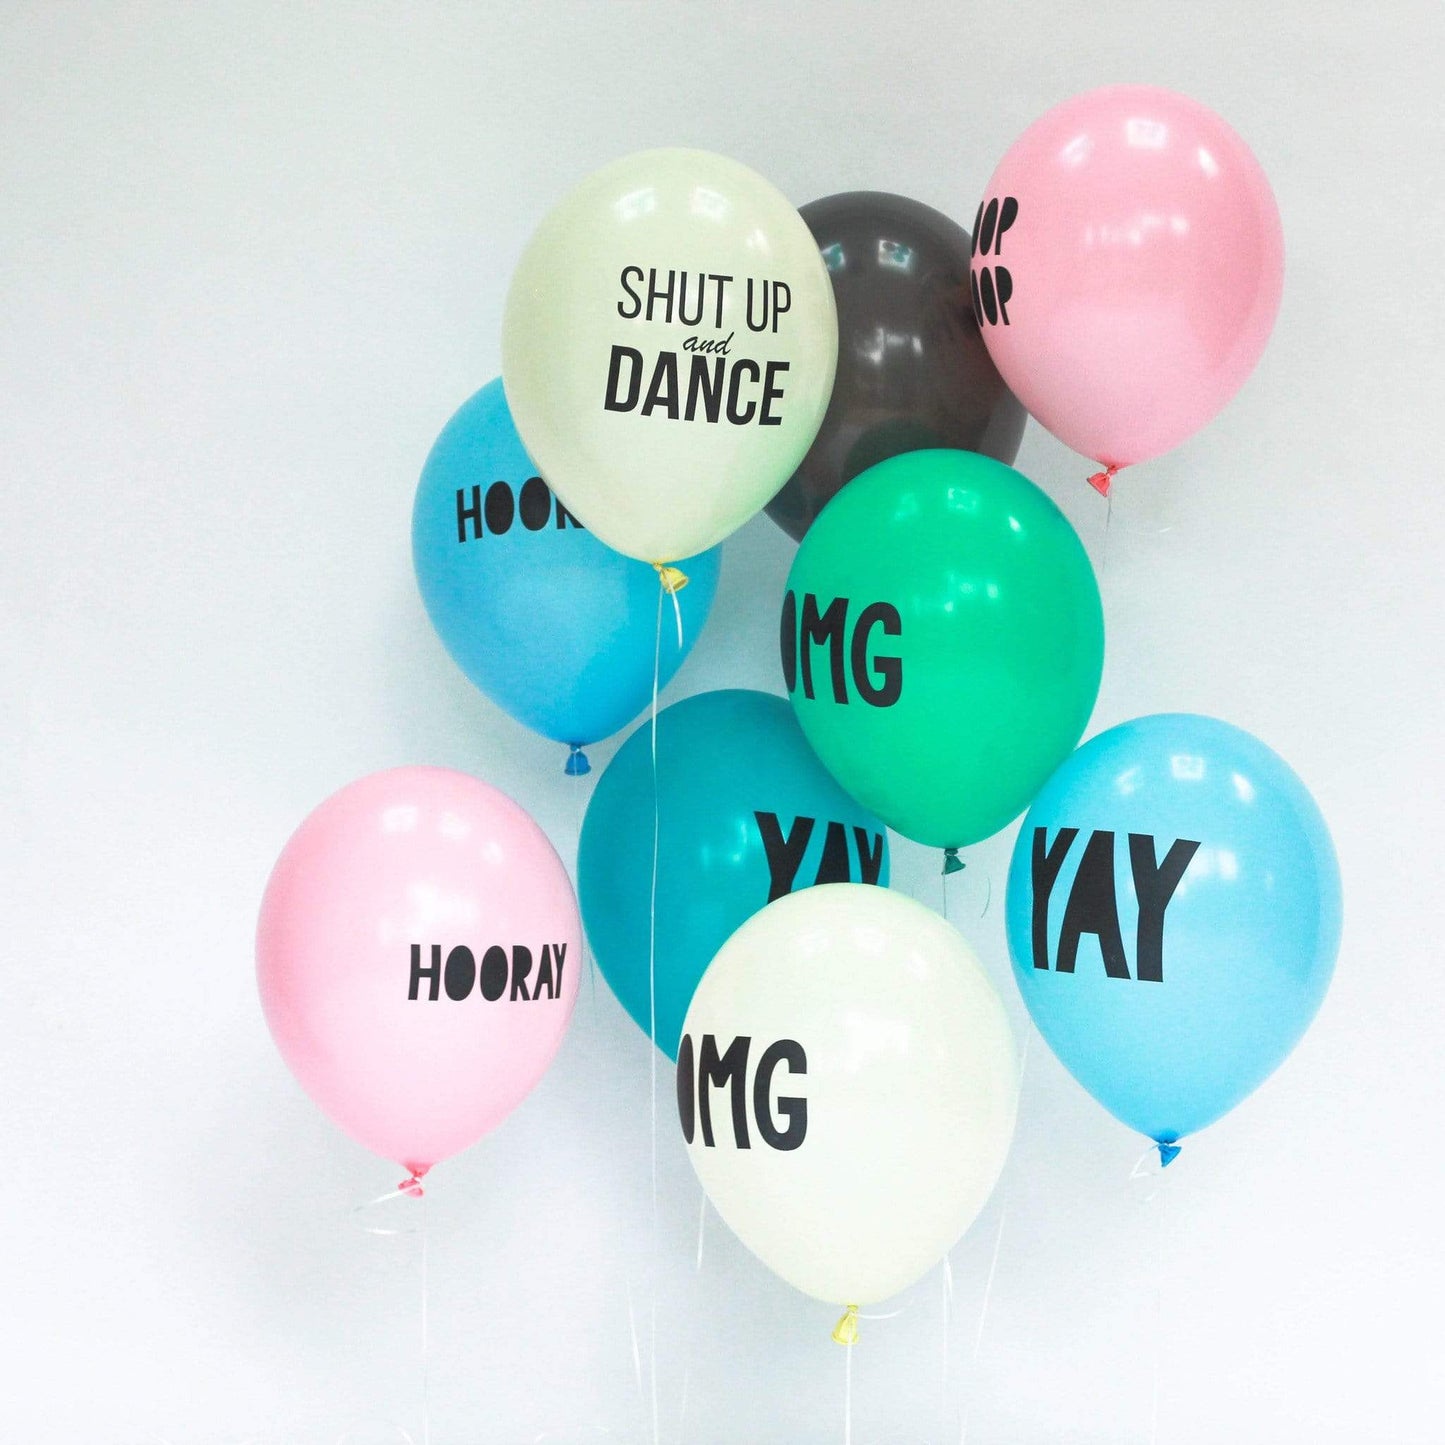 OMG Balloons Mint | Unique Balloons | Modern Party Balloons UK Pretty Little Party Shop